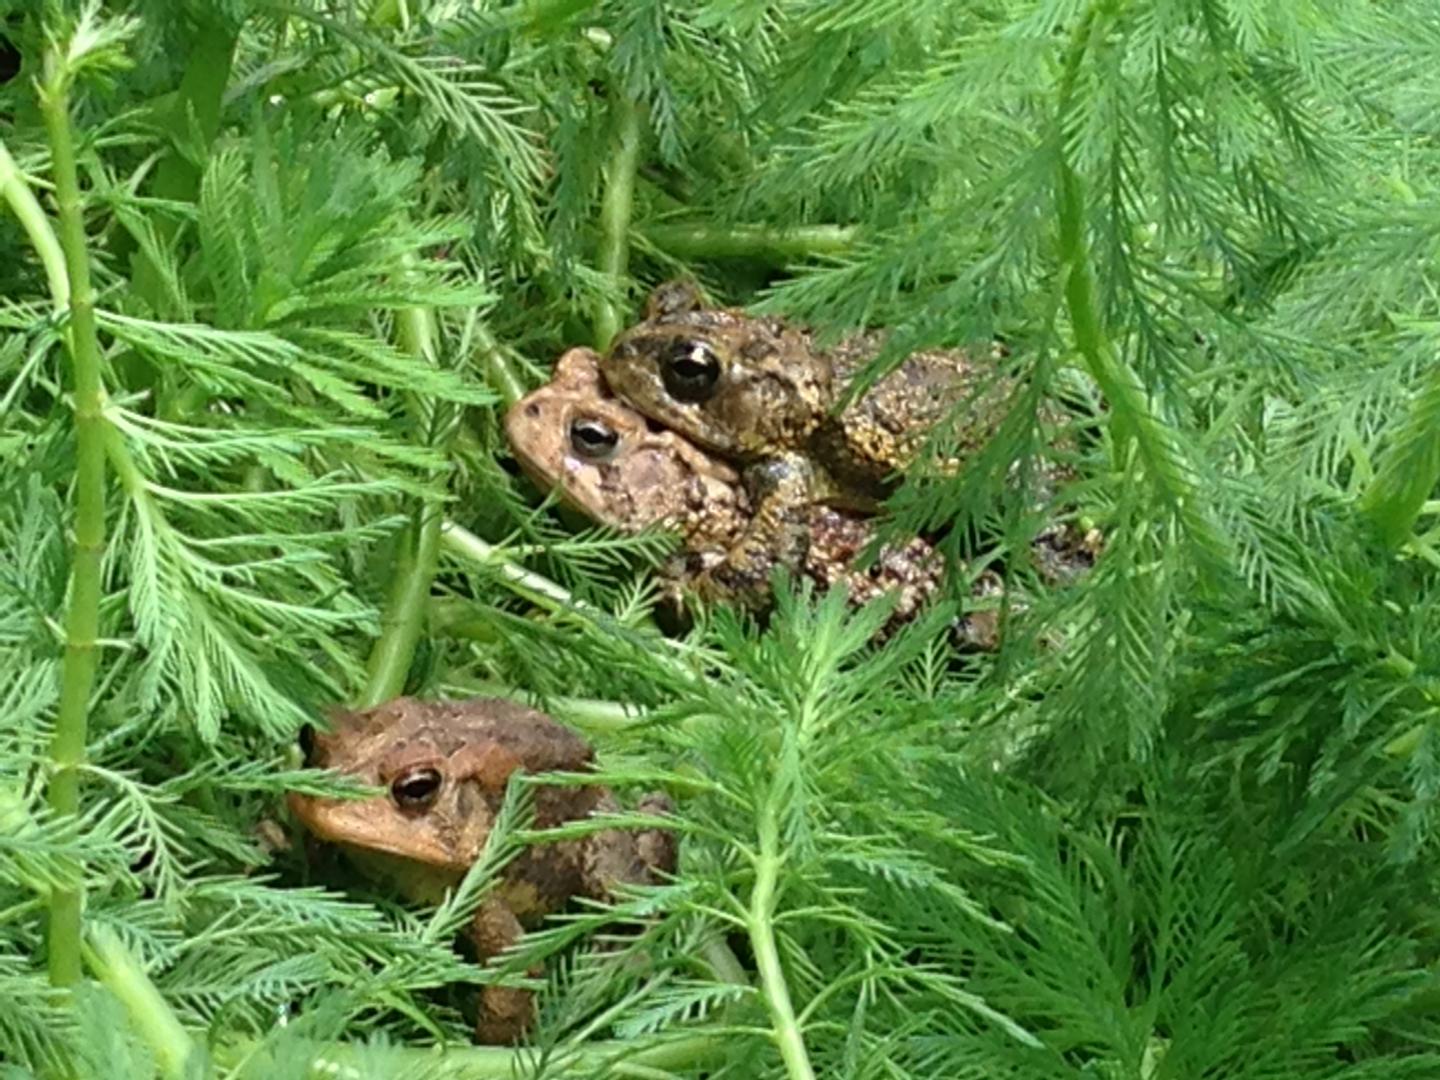 Adult Southern Toads in Amplexus (Breeding) at a Study Site